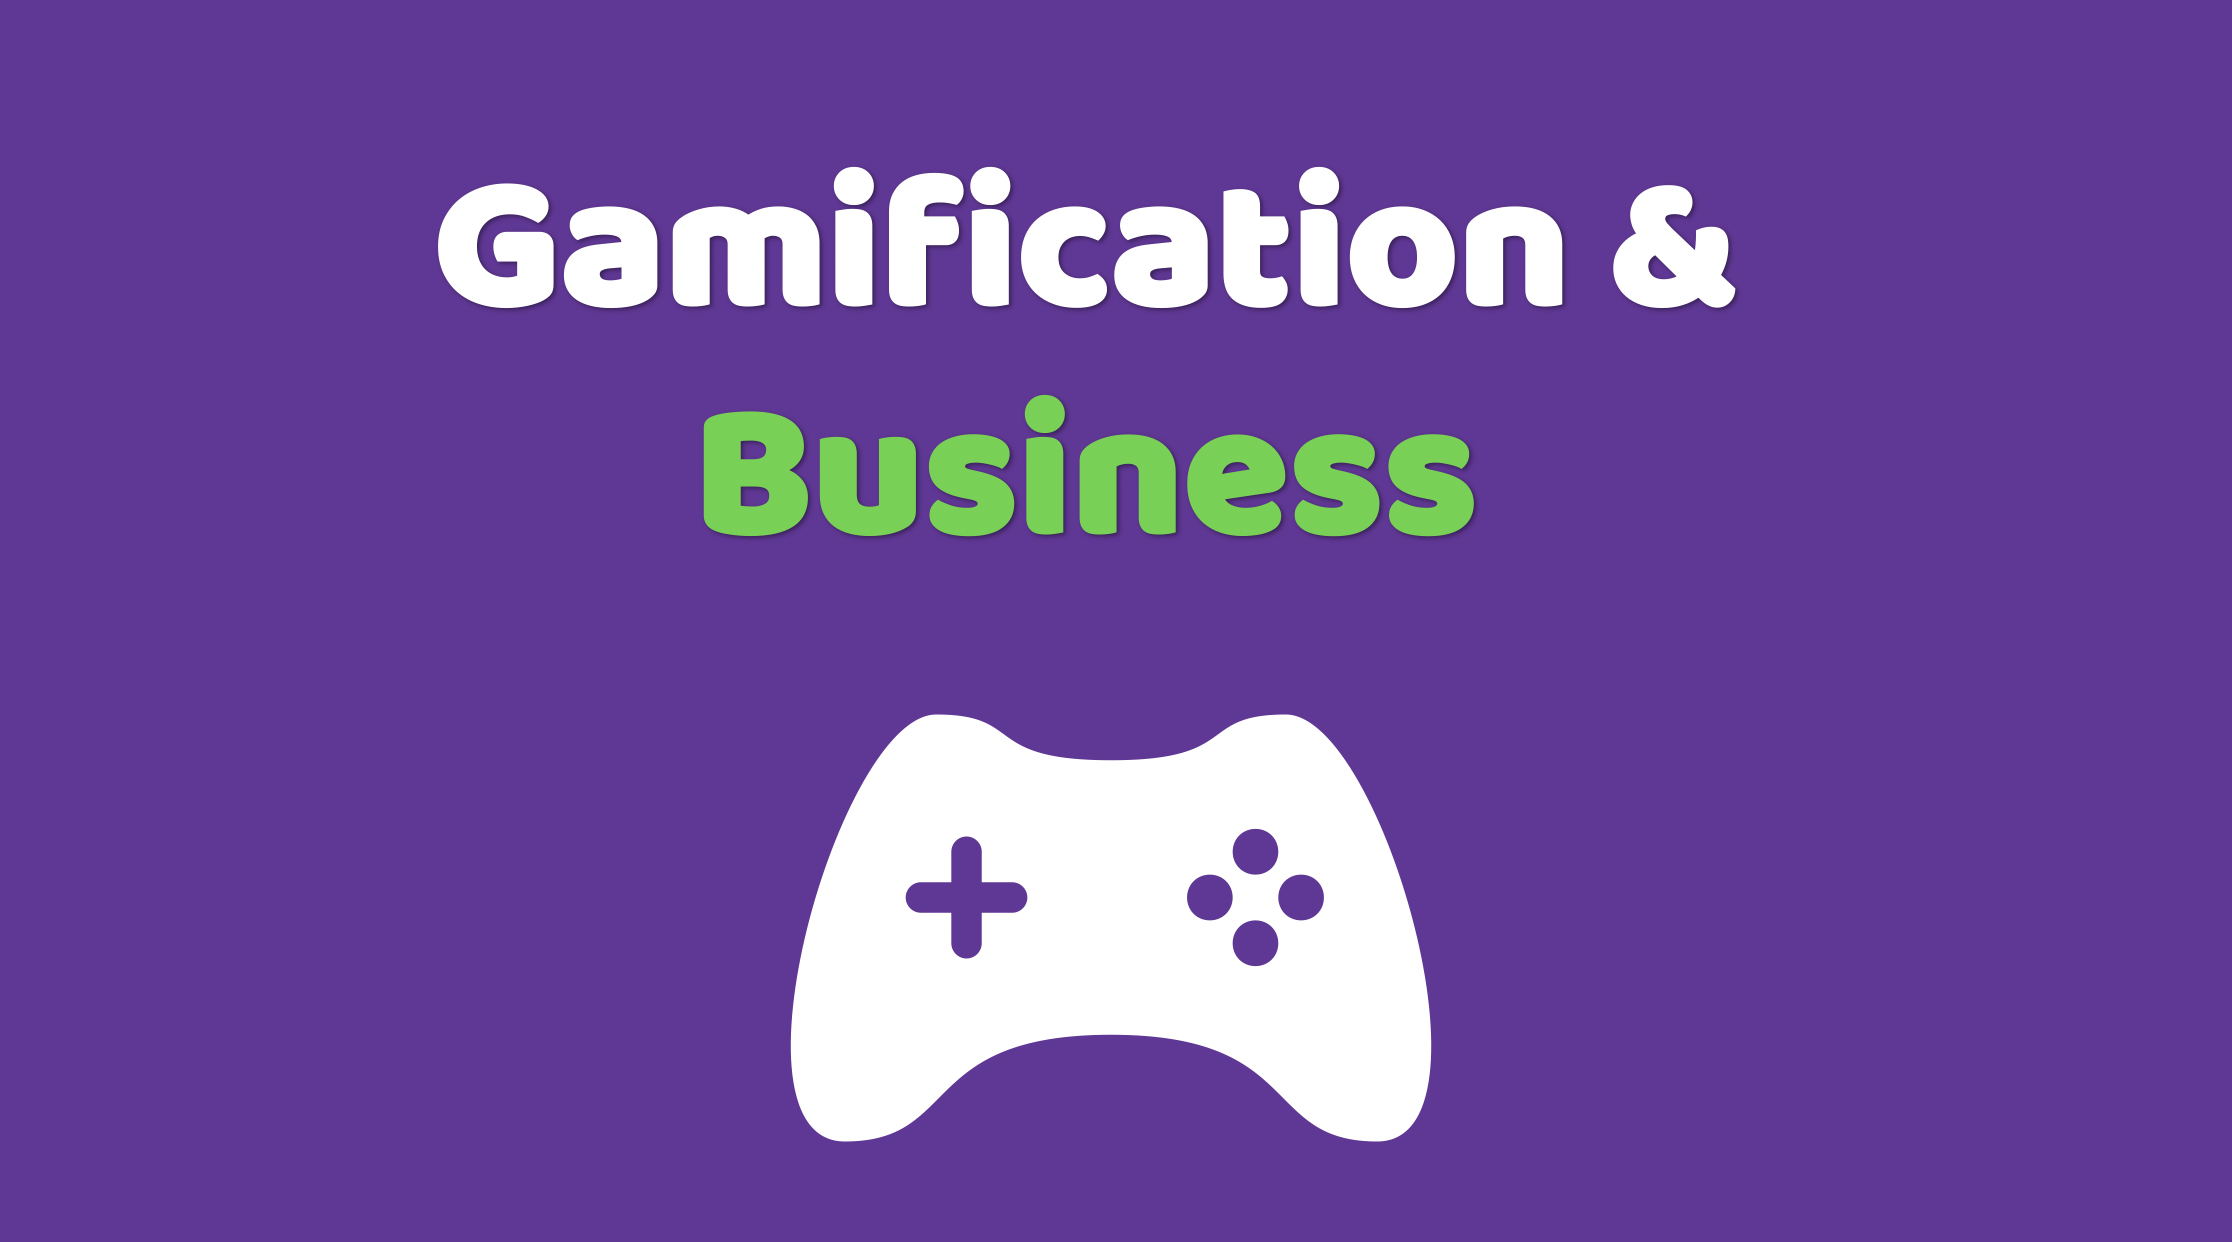 Gamification - Business